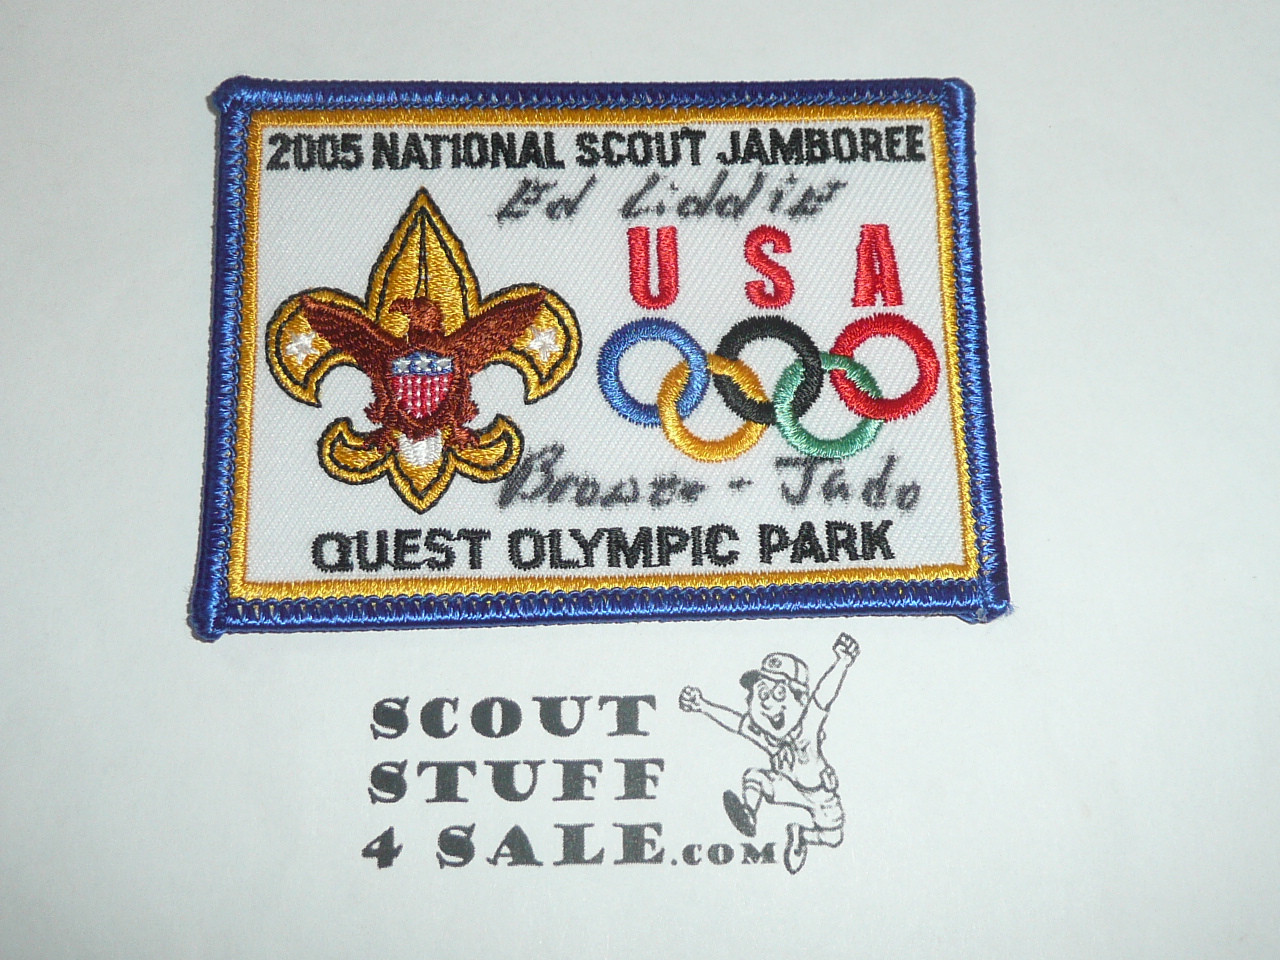 2005 National Jamboree Quest Olympic Park Patch signed by Olympic medalist